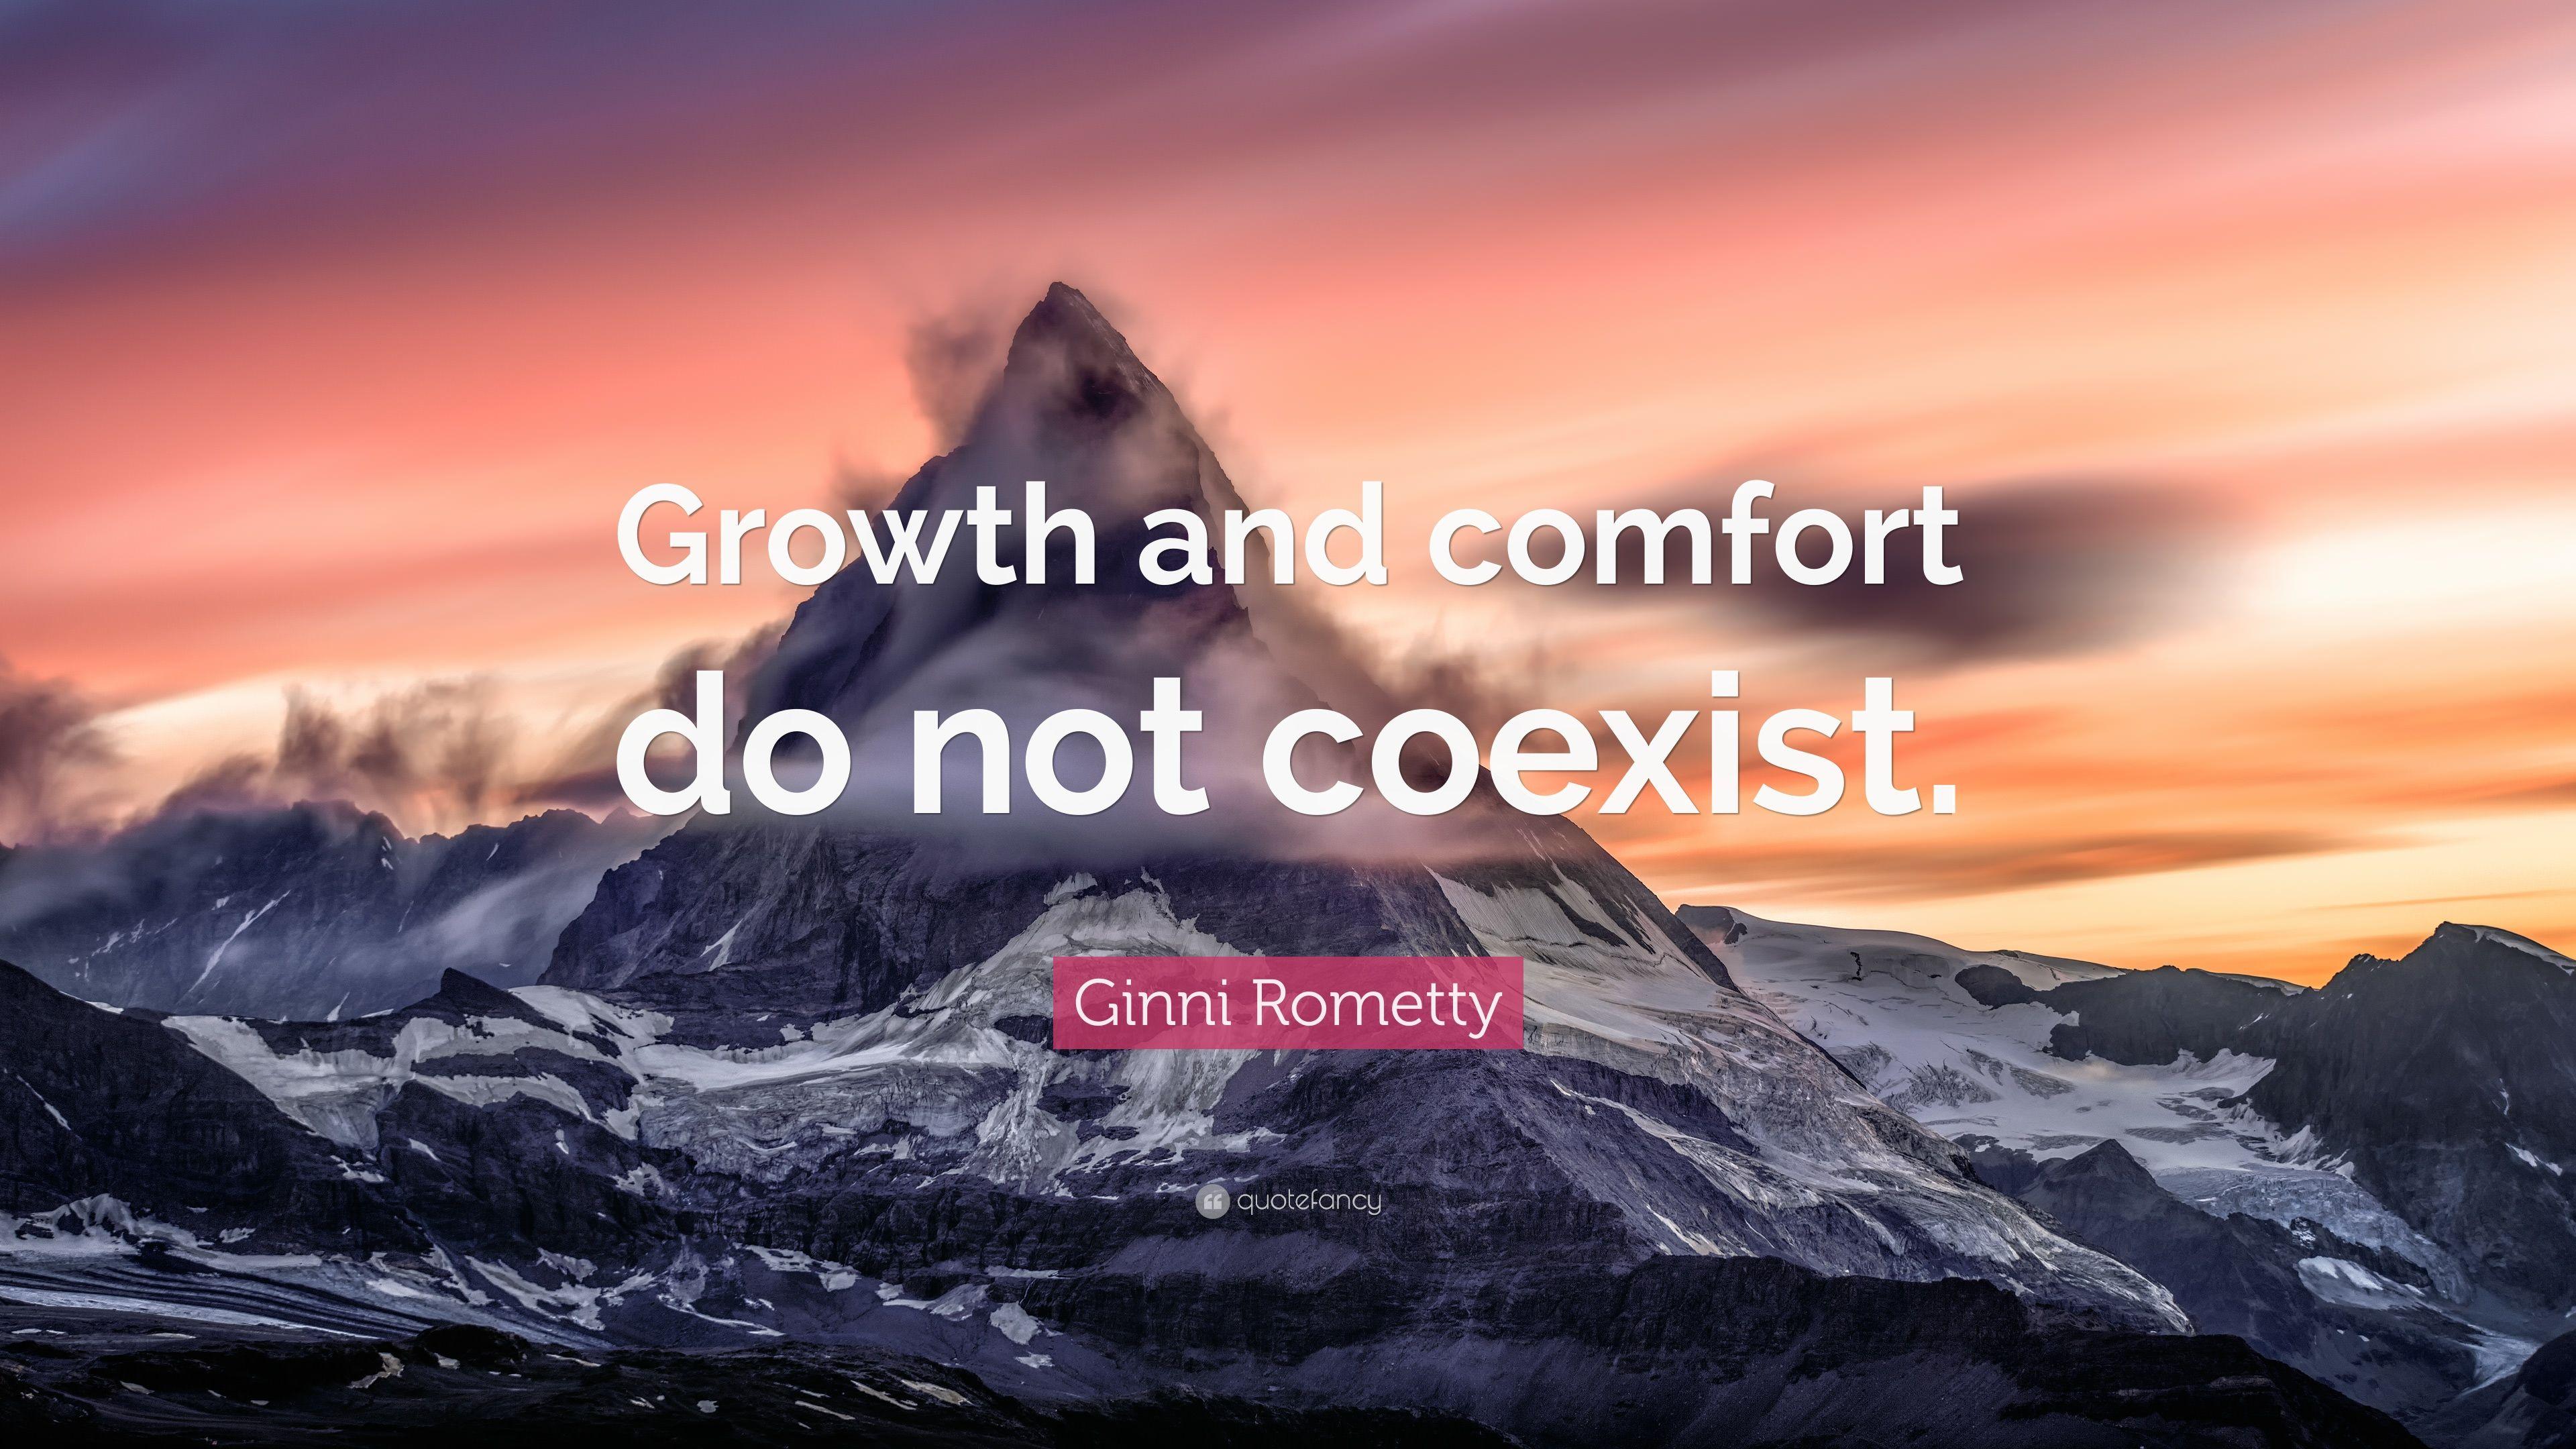 Ginni Rometty Quote: “Growth and comfort do not coexist.” 12